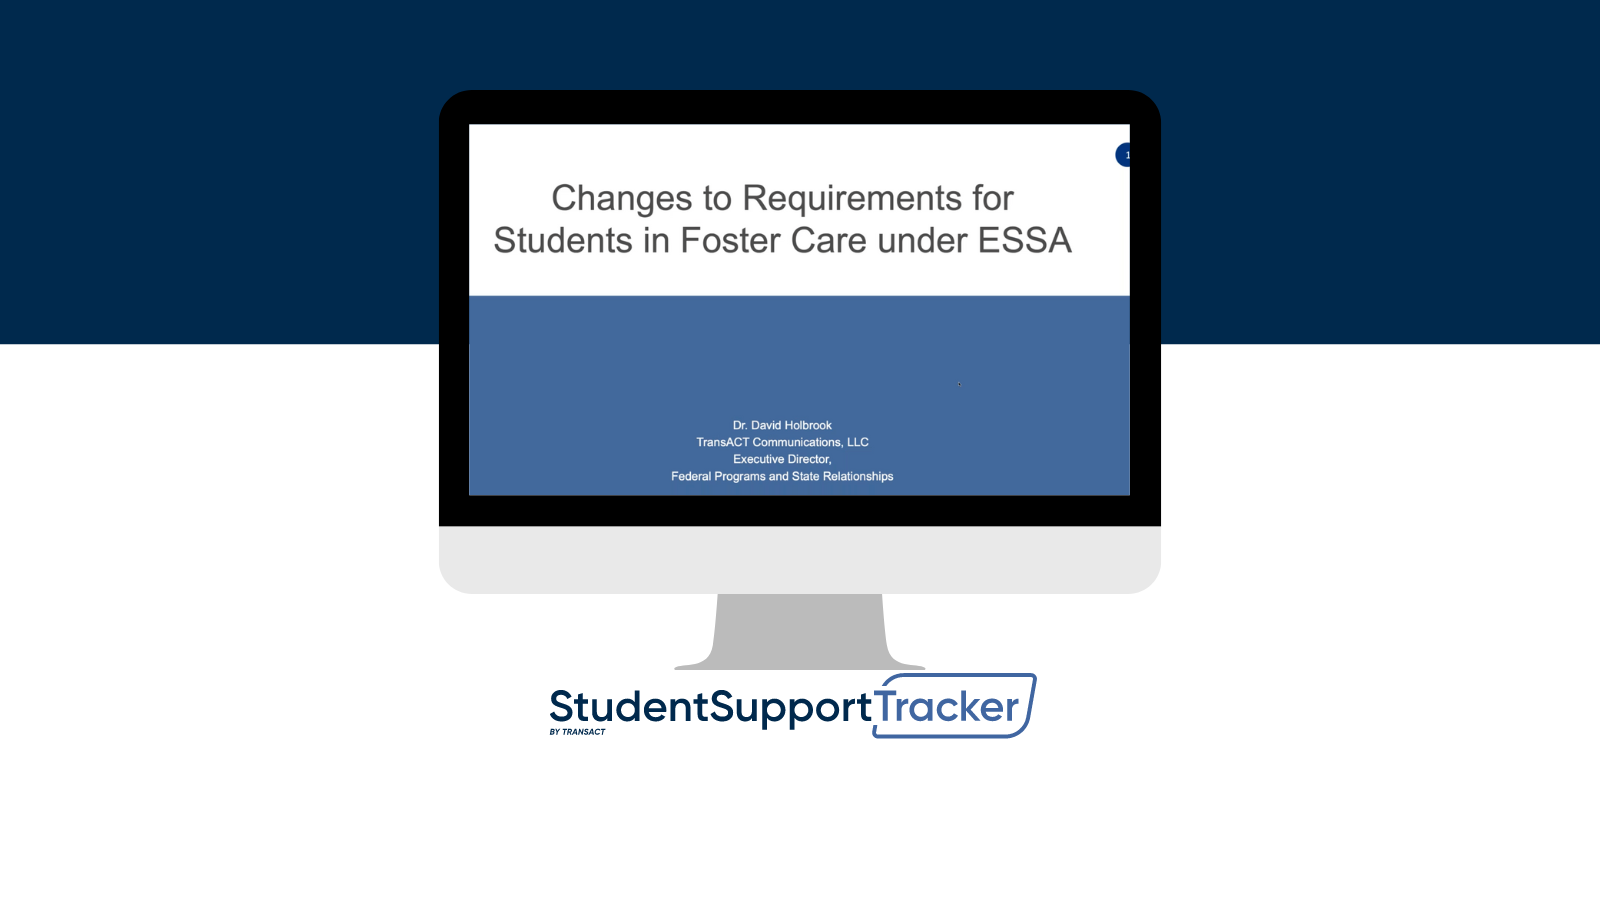 Changes in Educational Requirements for Students Experiencing Homelessness under ESSA